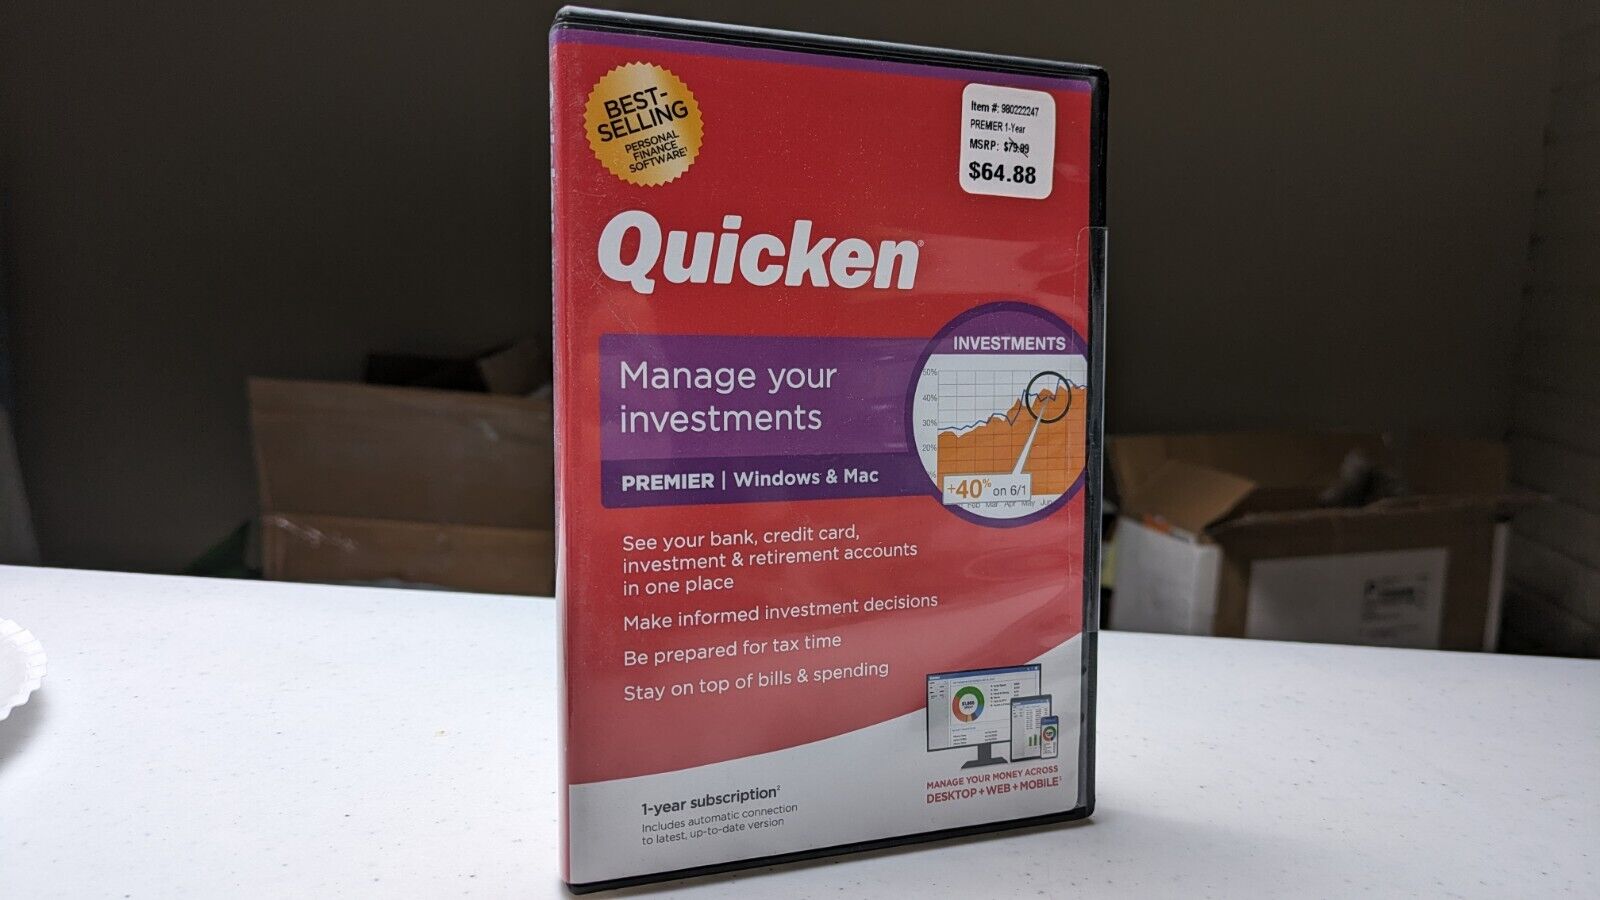 Intuit Quicken, Manage Your Investments 2019, Premier for Windows (CD Format)